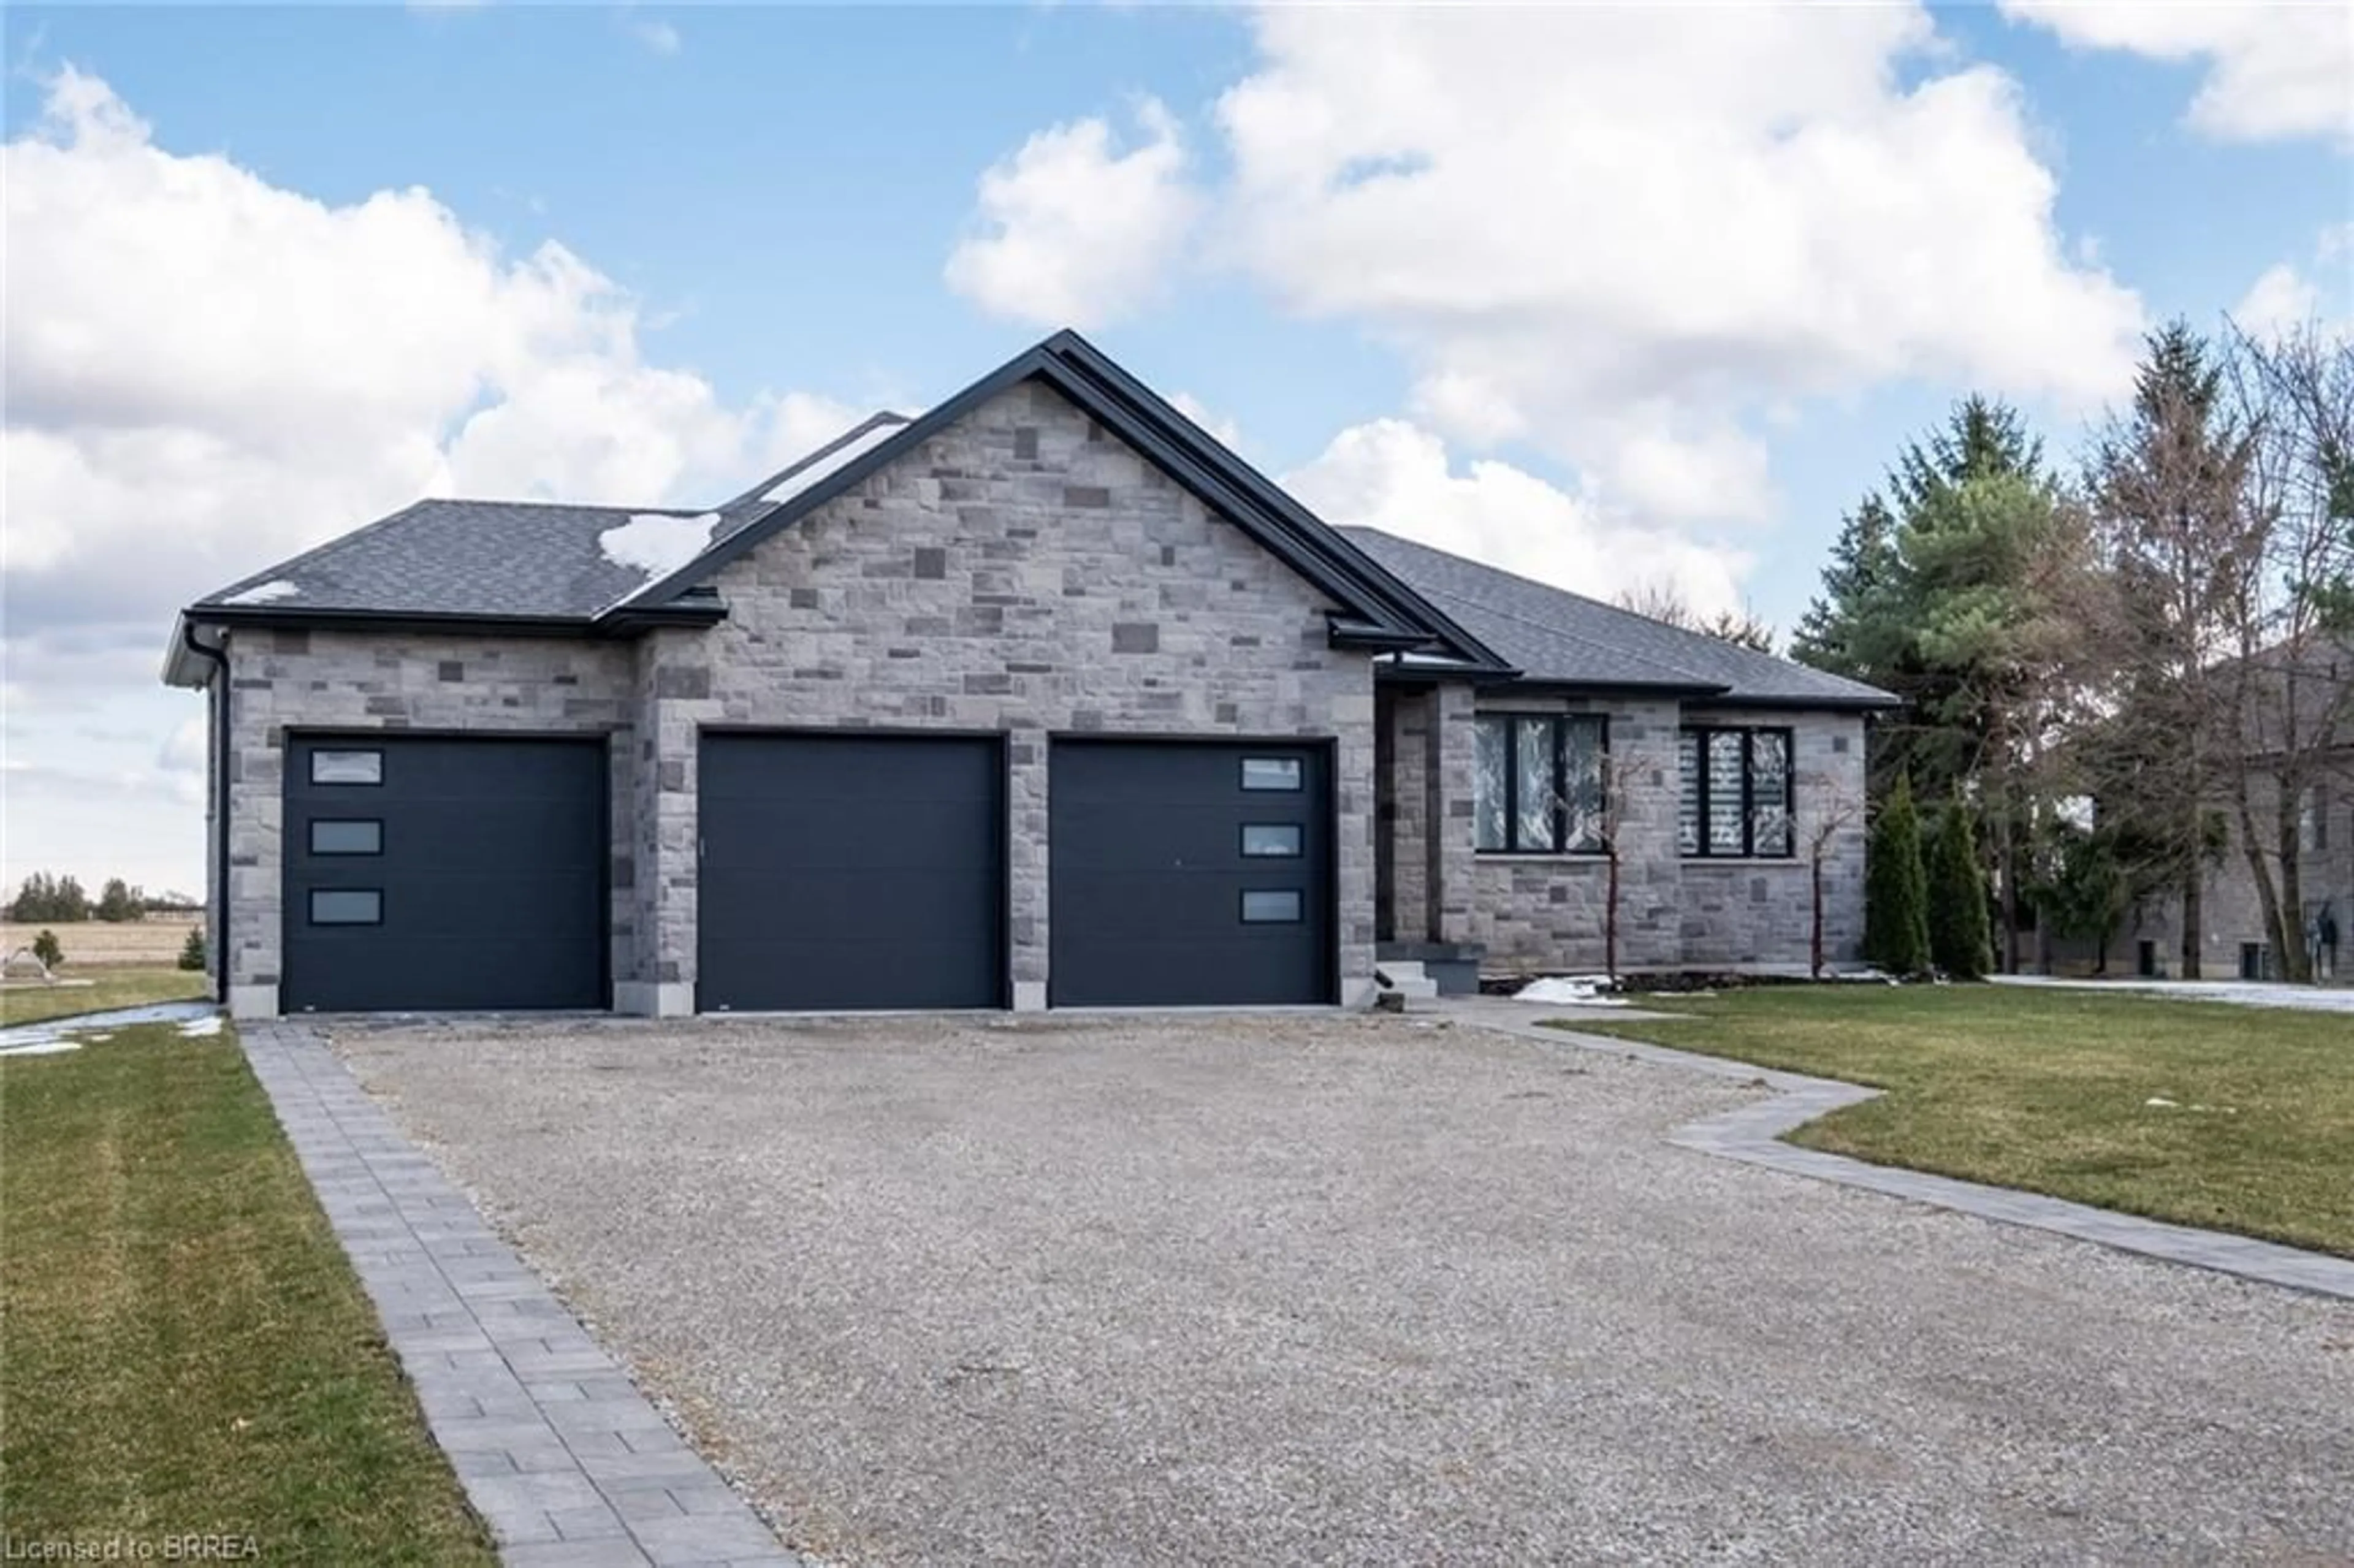 Home with brick exterior material for 790 Mount Pleasant Rd, Mount Pleasant Ontario N0E 1K0